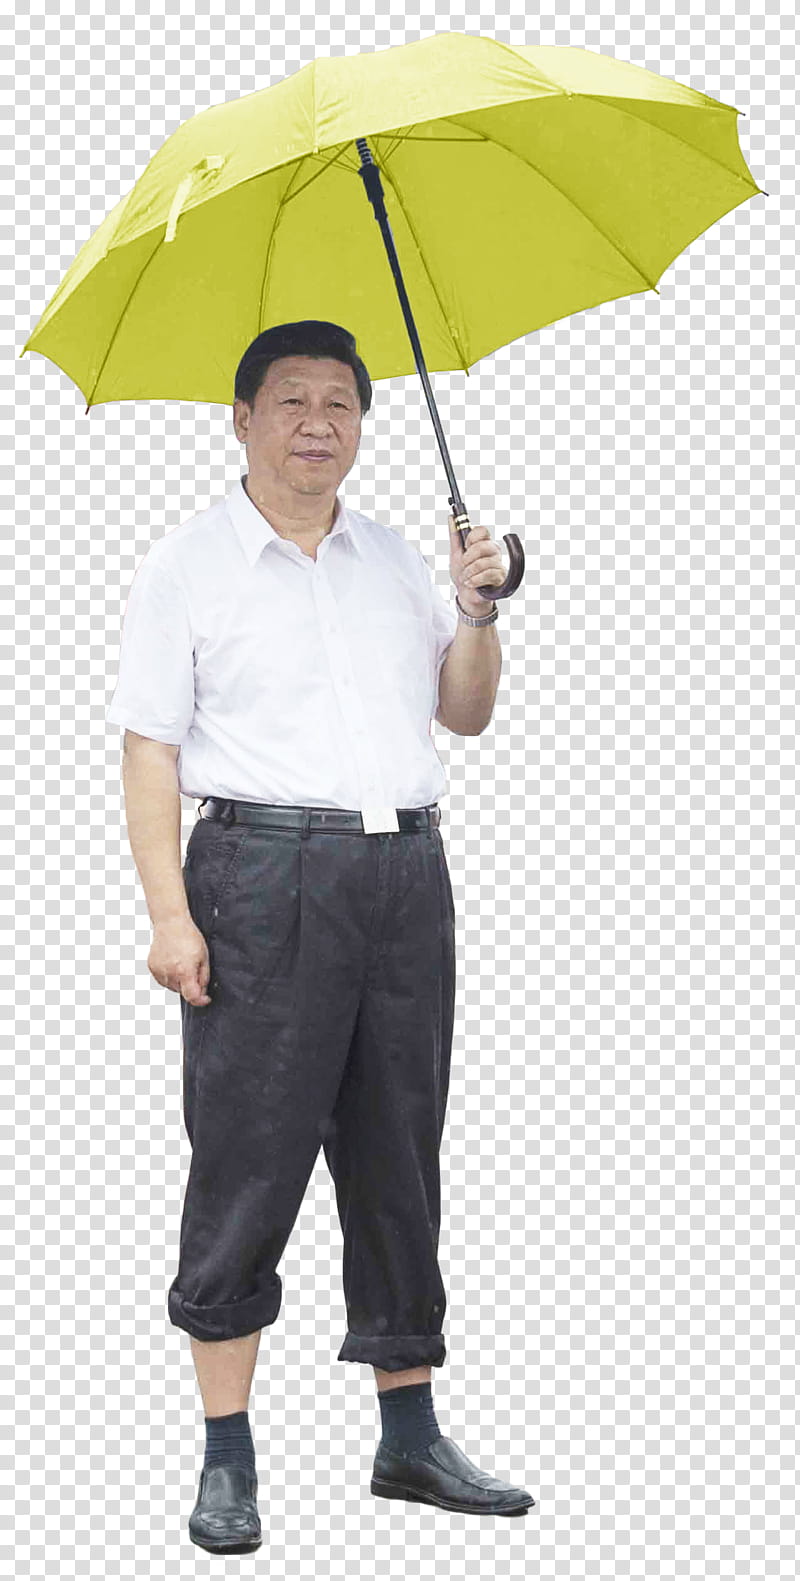 Congress, Xi Jinping, China, President Of The Peoples Republic Of China, National Congress Of The Communist Party Of China, Umbrella, Standing, Shade transparent background PNG clipart